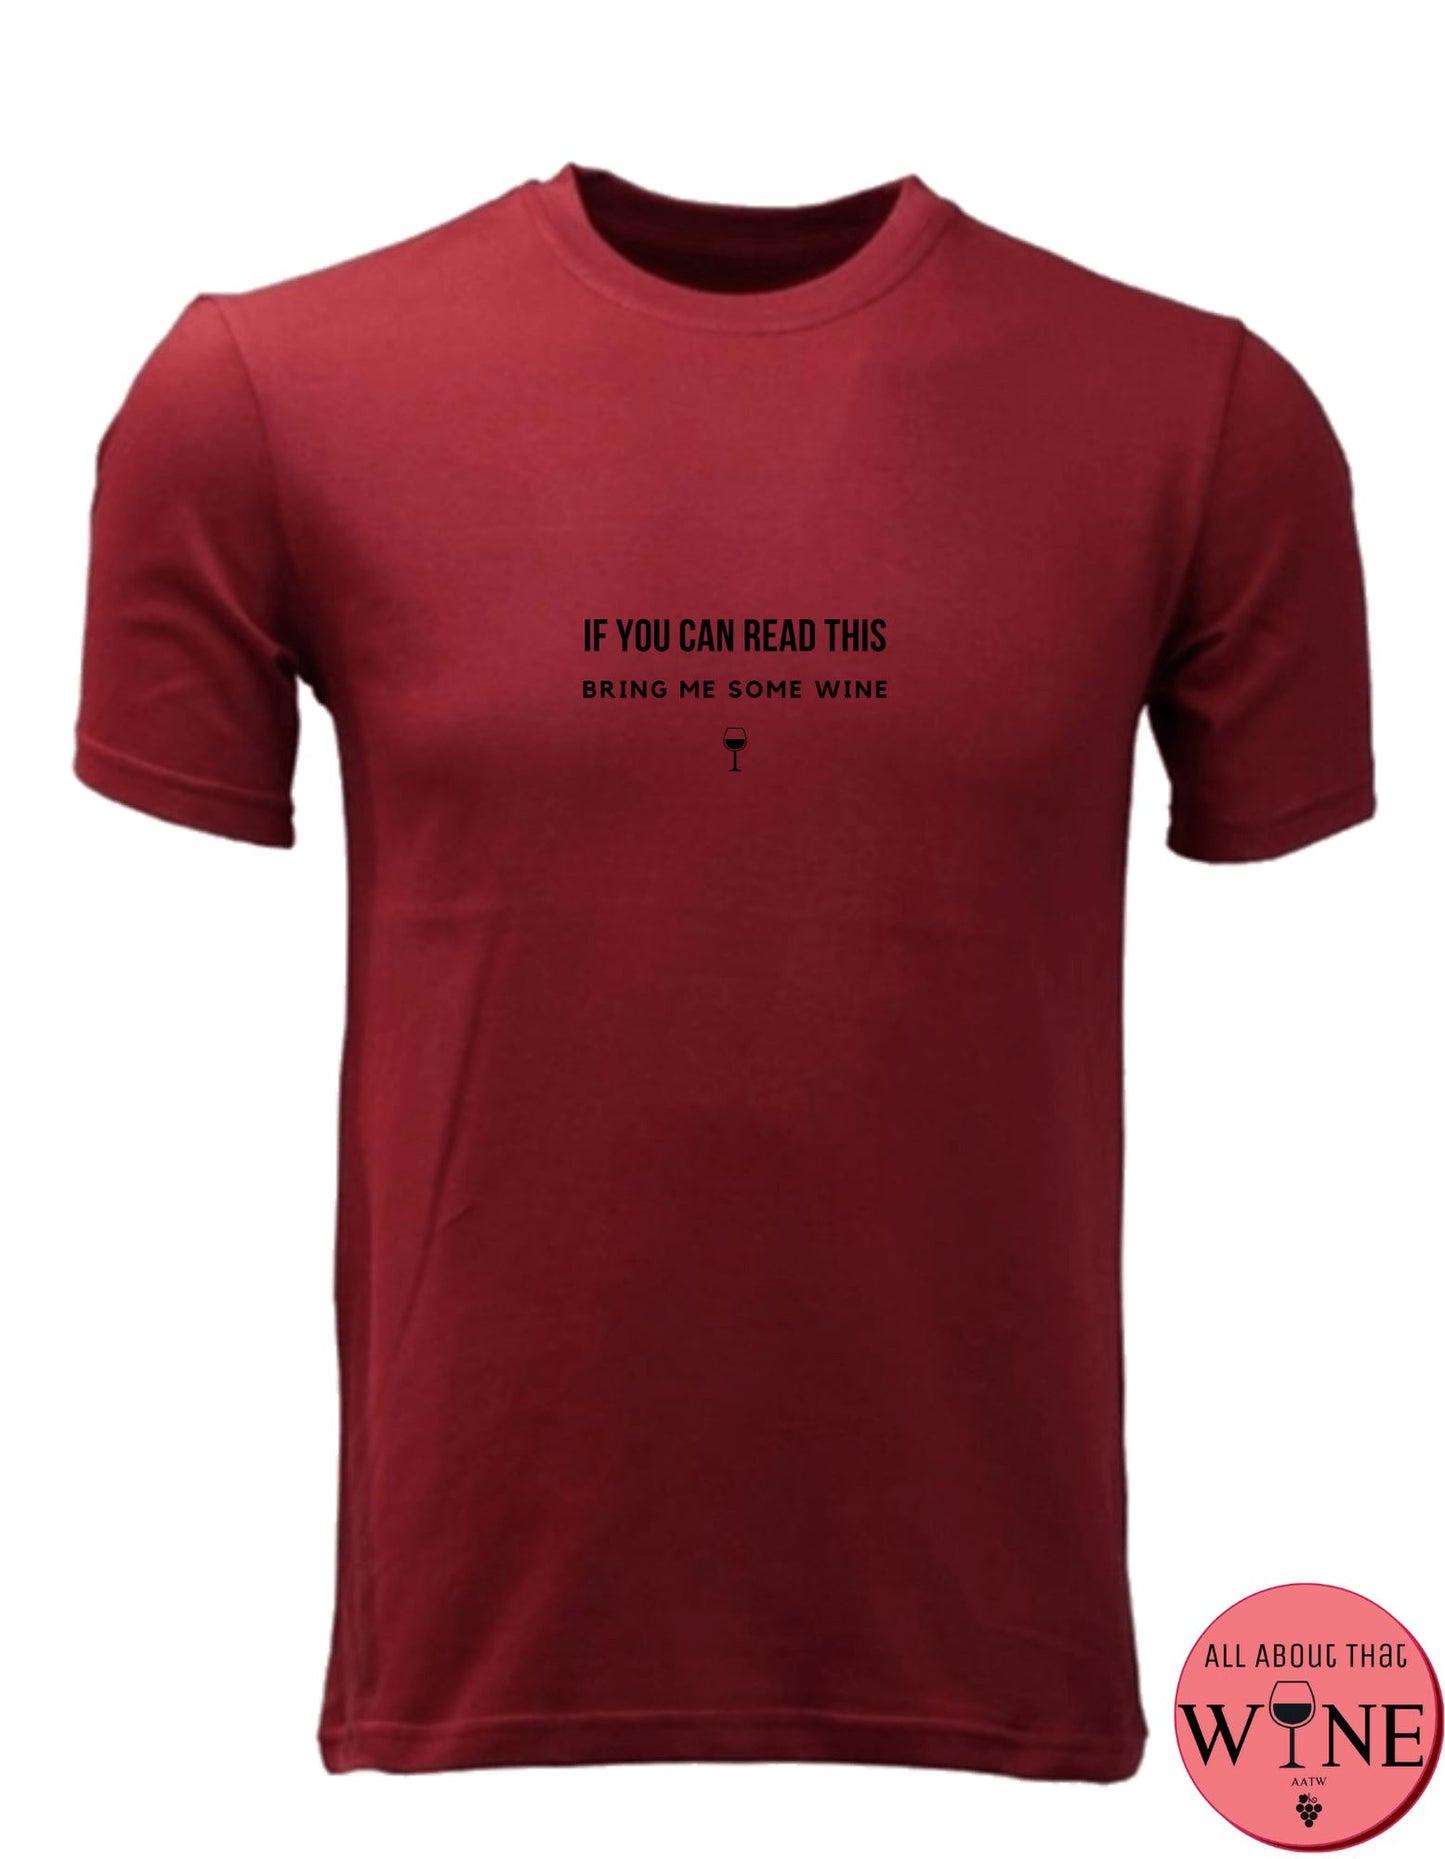 Bring Me Some Wine - Unisex/Male M Deep red with black